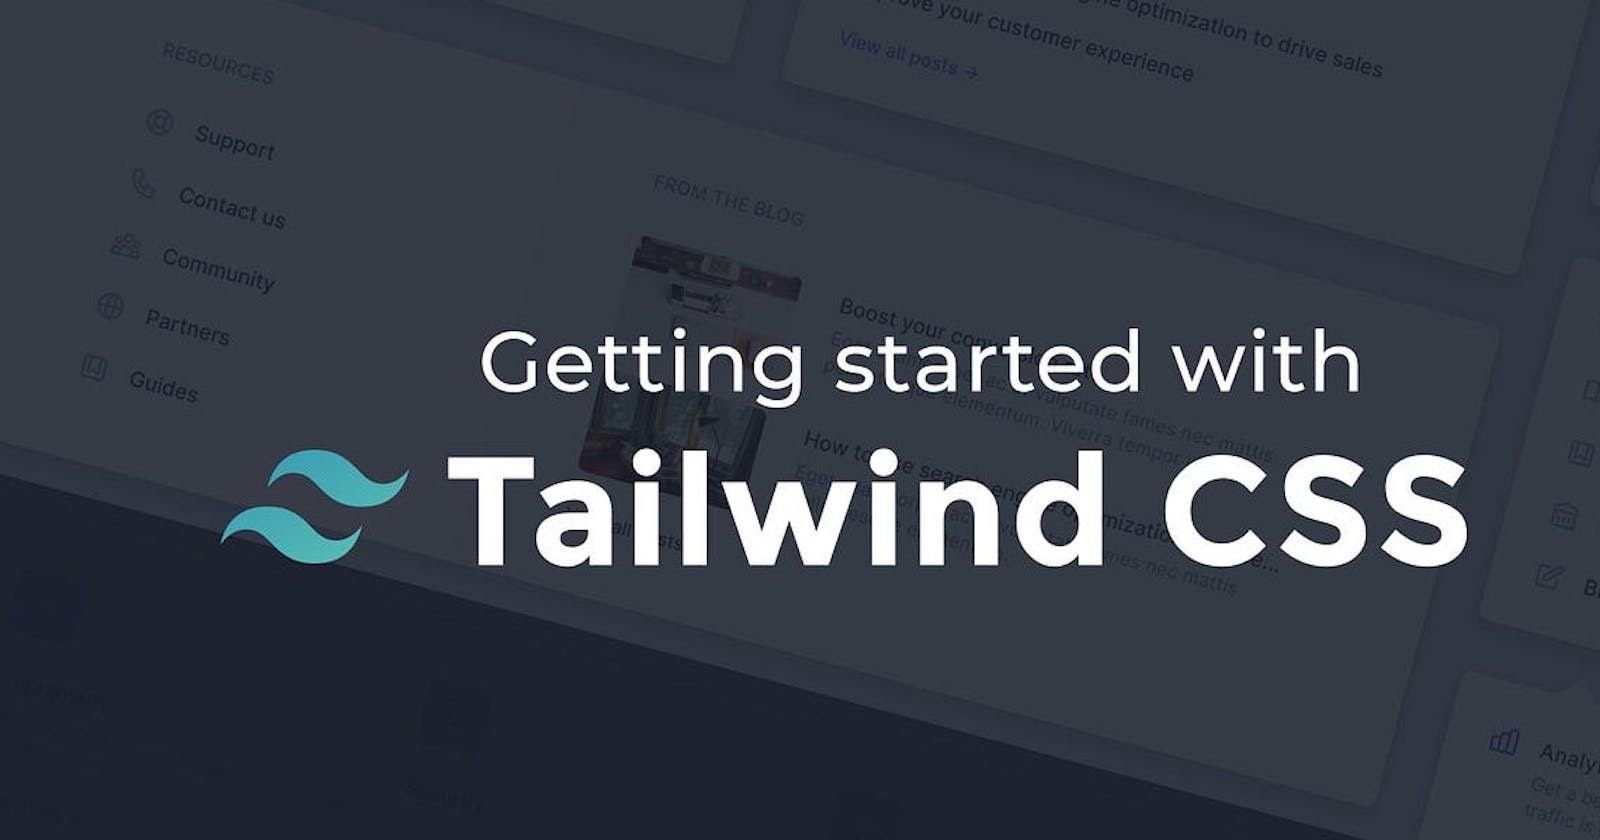 Tailwind utility classes not working? [SOLVED]